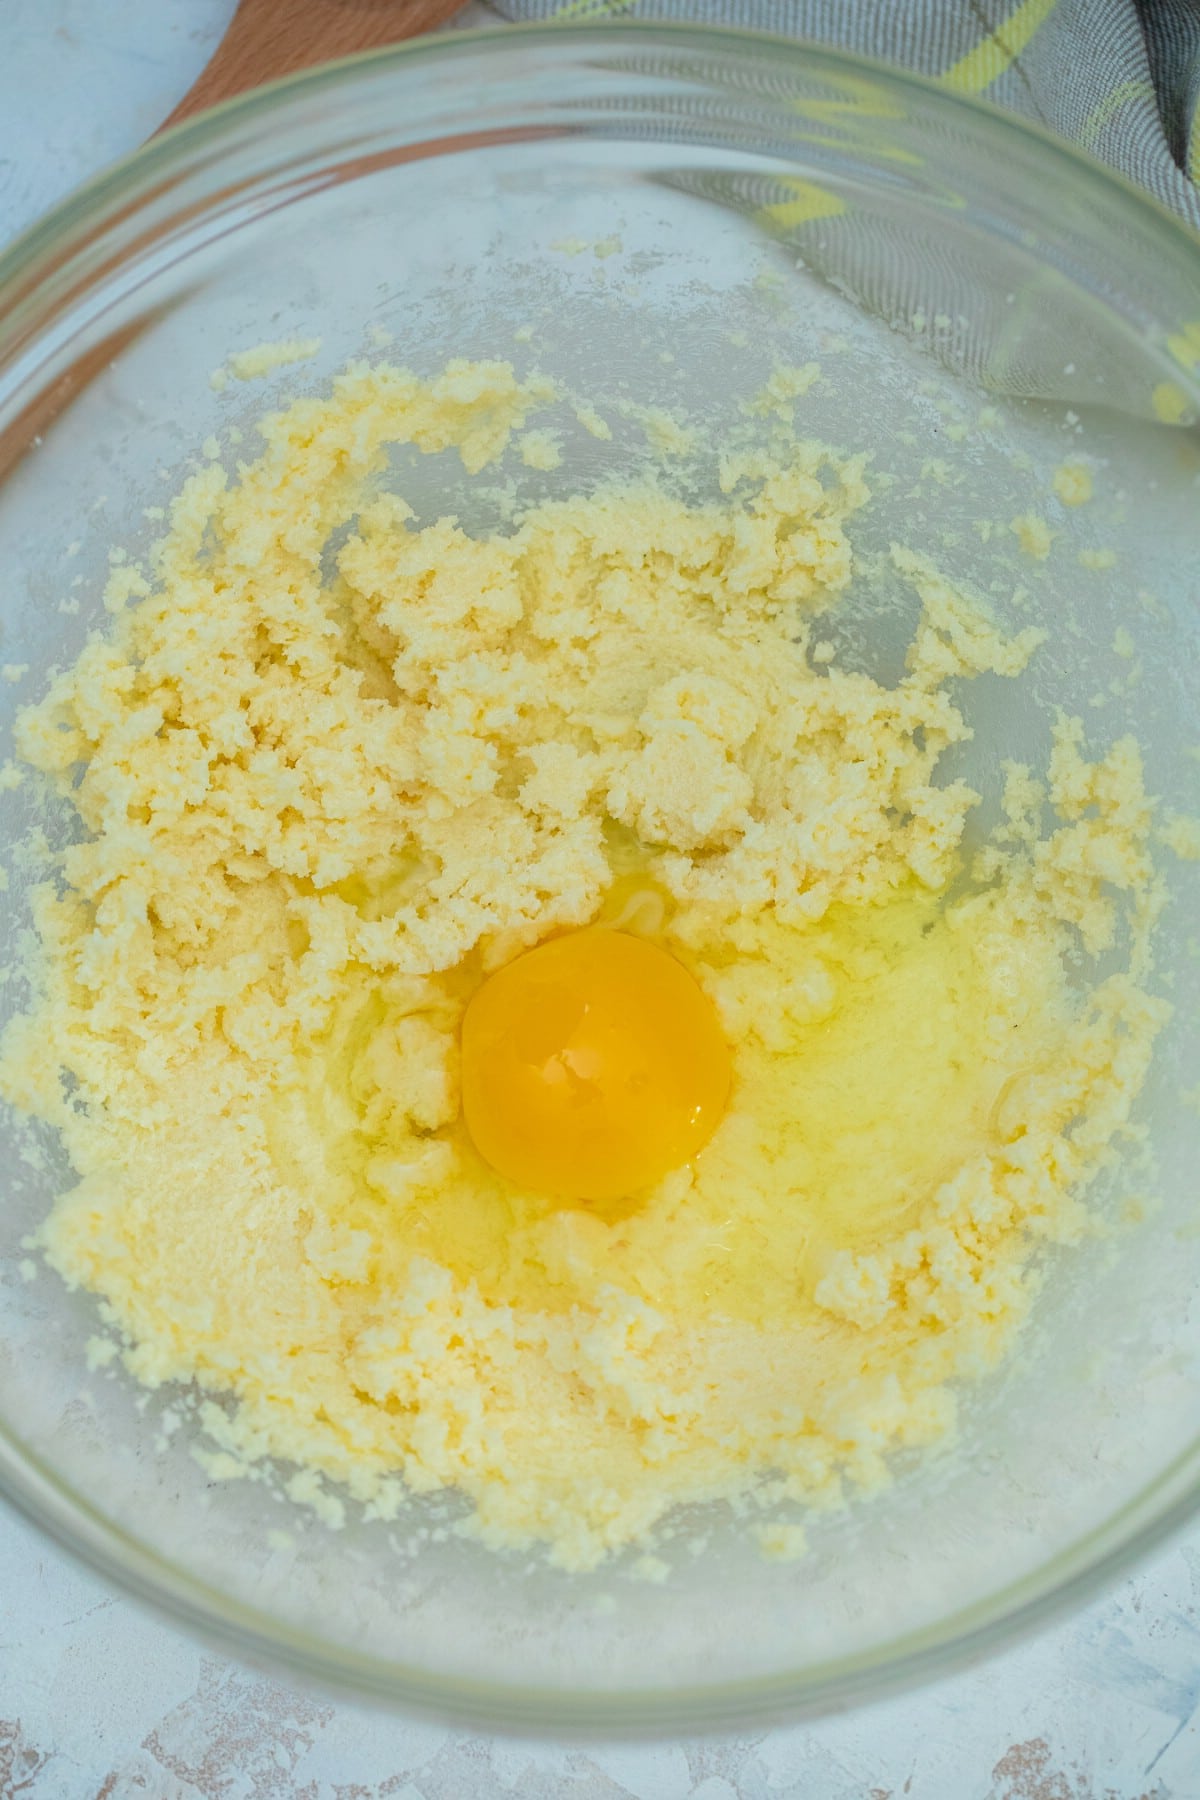 Sugar and eggs in bowl